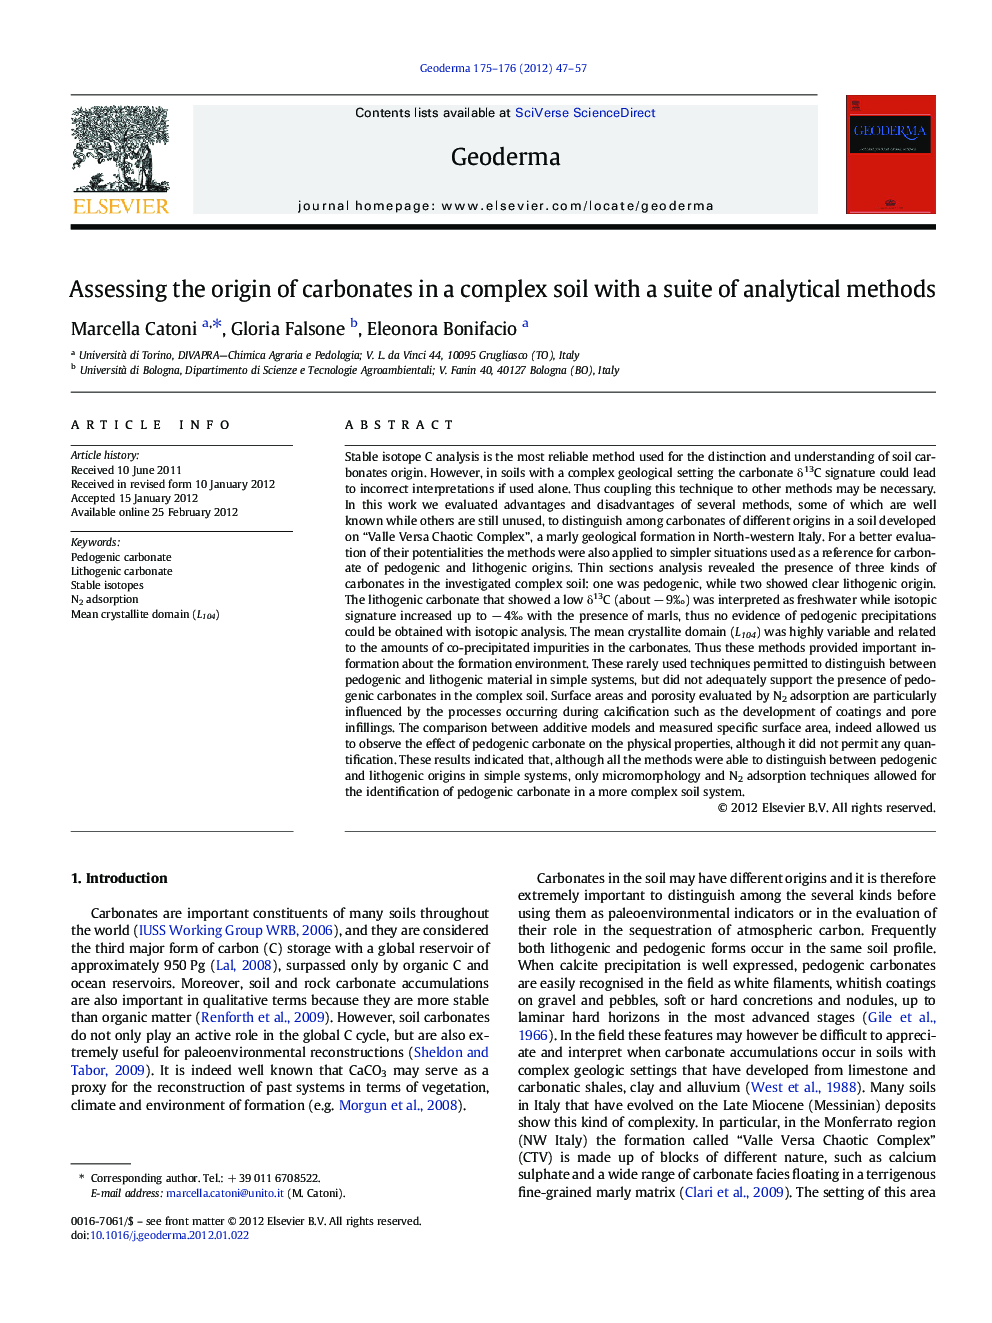 Assessing the origin of carbonates in a complex soil with a suite of analytical methods